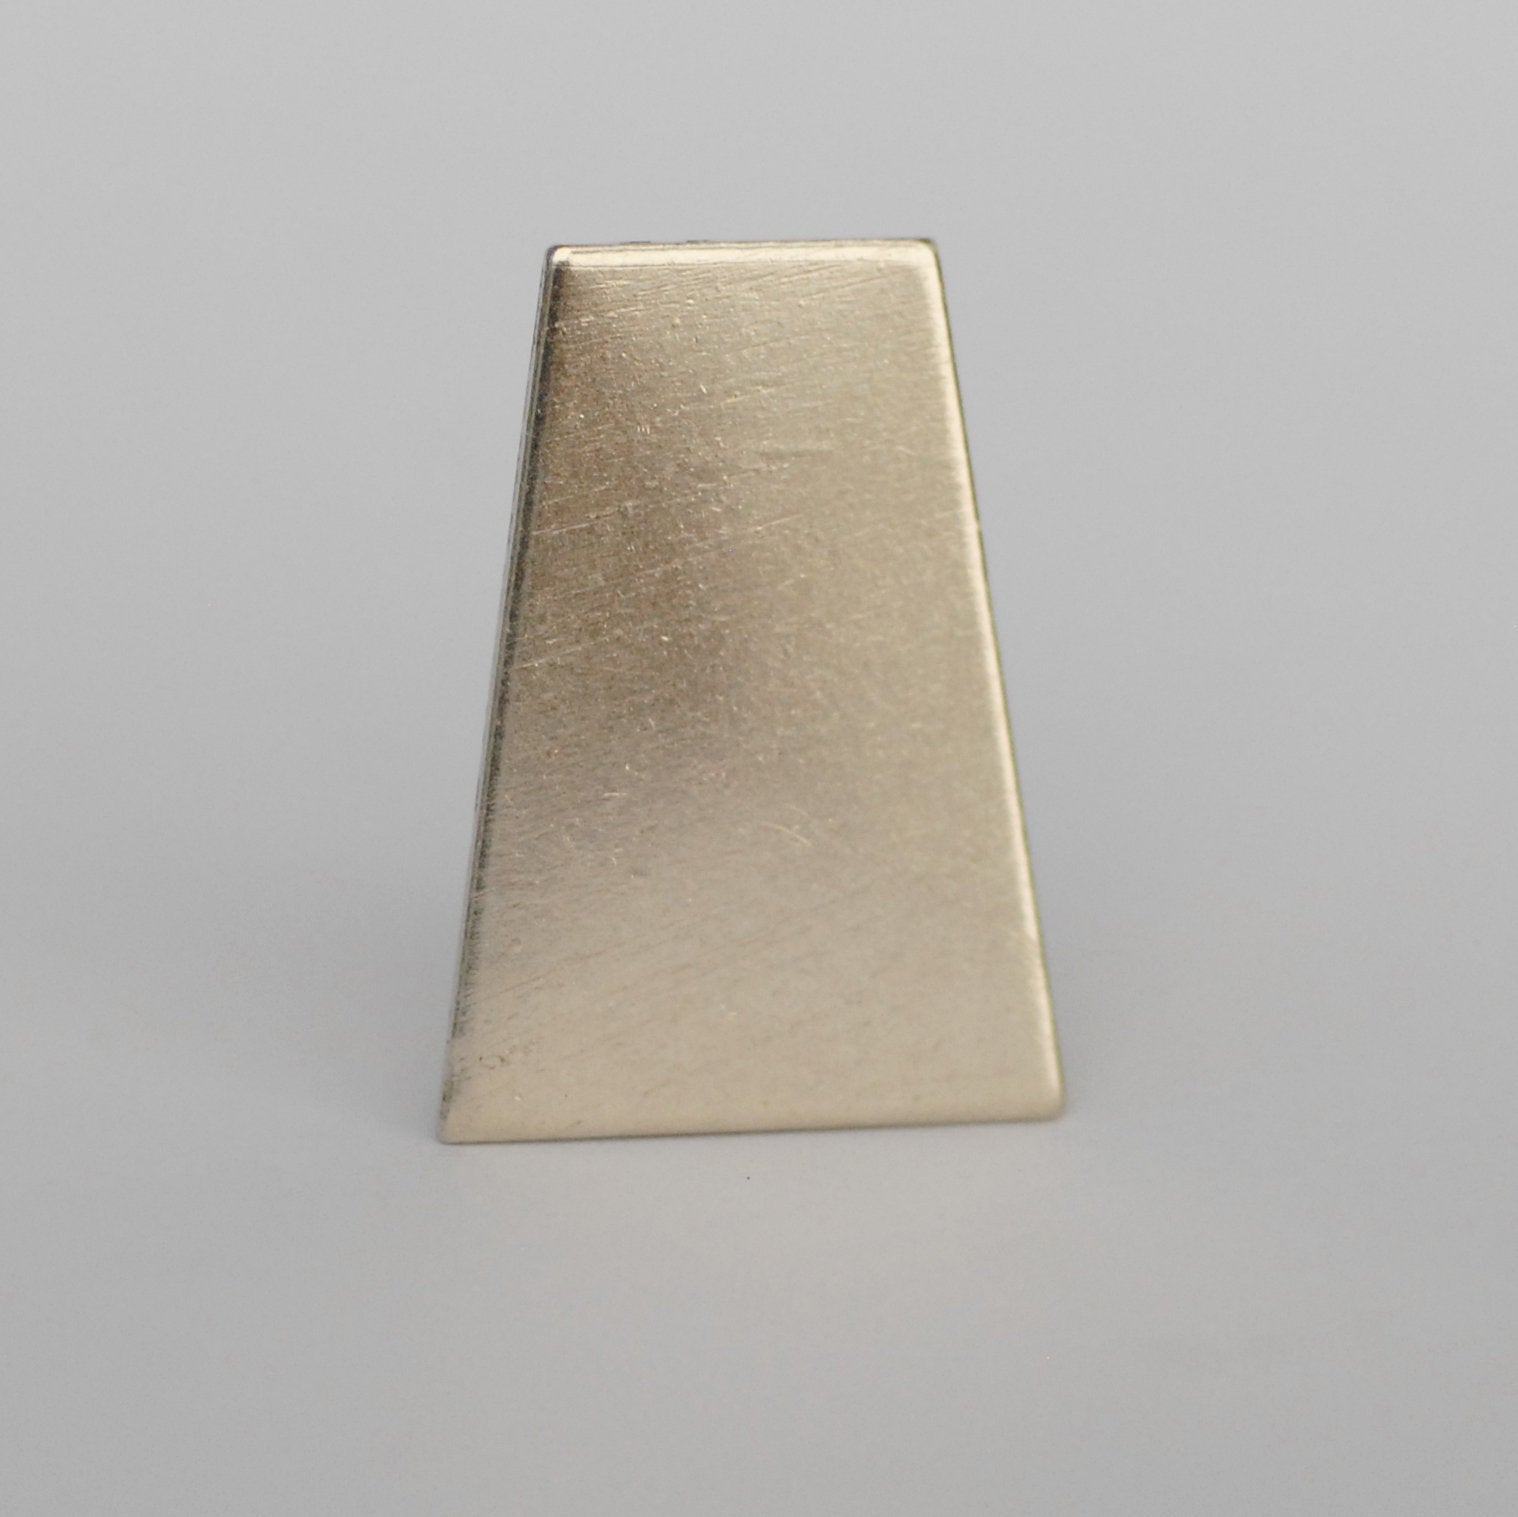 Trapezoid shapes 25mm x 18mm Mexican Silver Blank 24G 22G 20G copper, brass, bronze, nickel silver